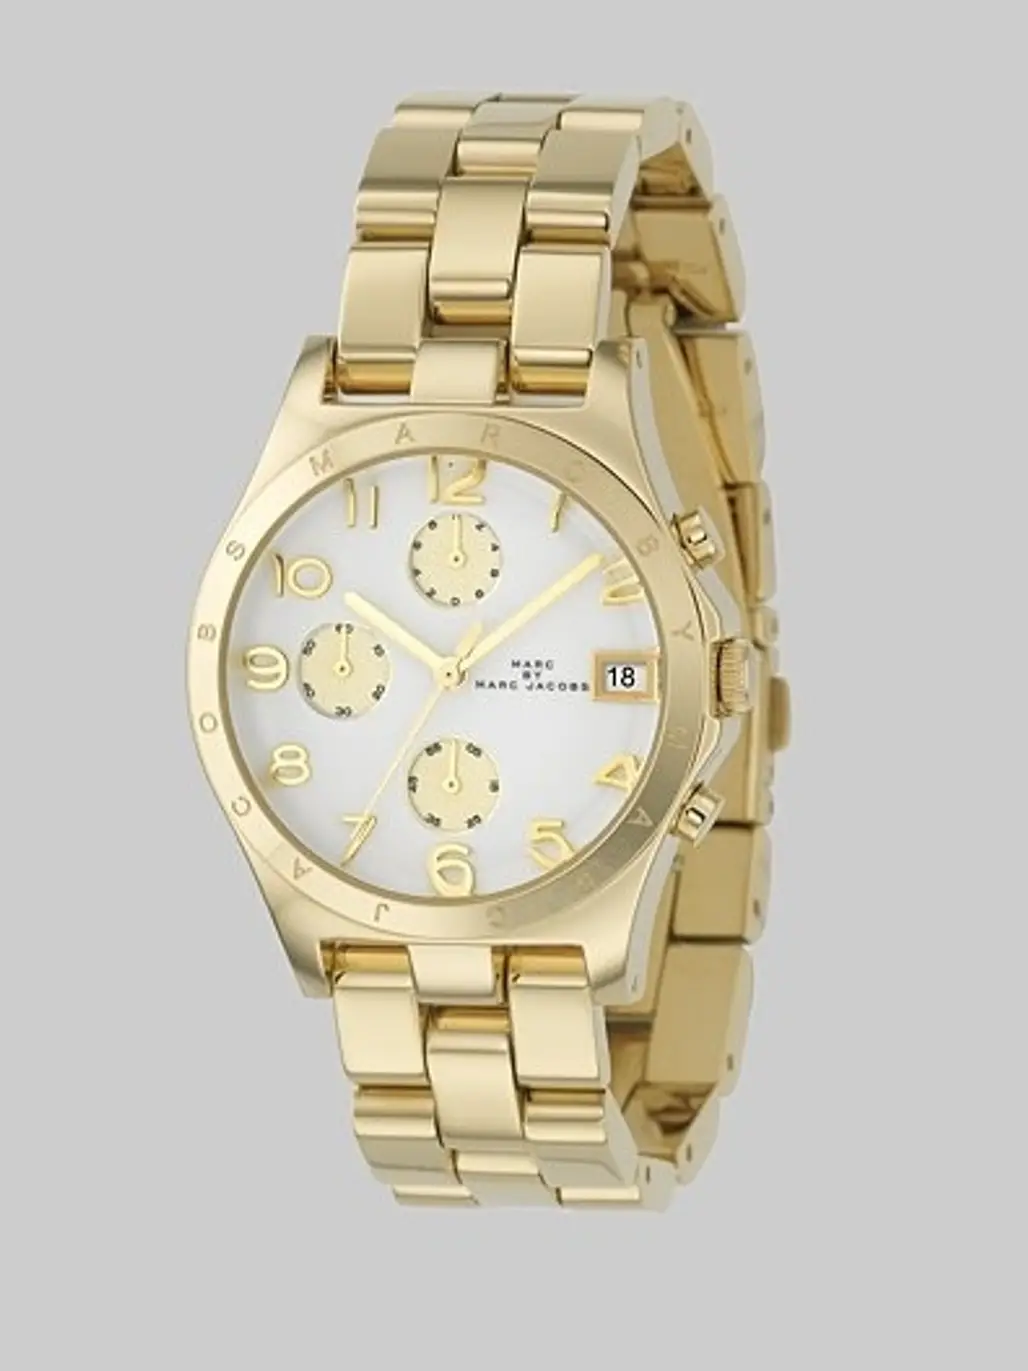 Marc by Marc Jacobs Ladies Gold IP Stainless Steel Henry Watch